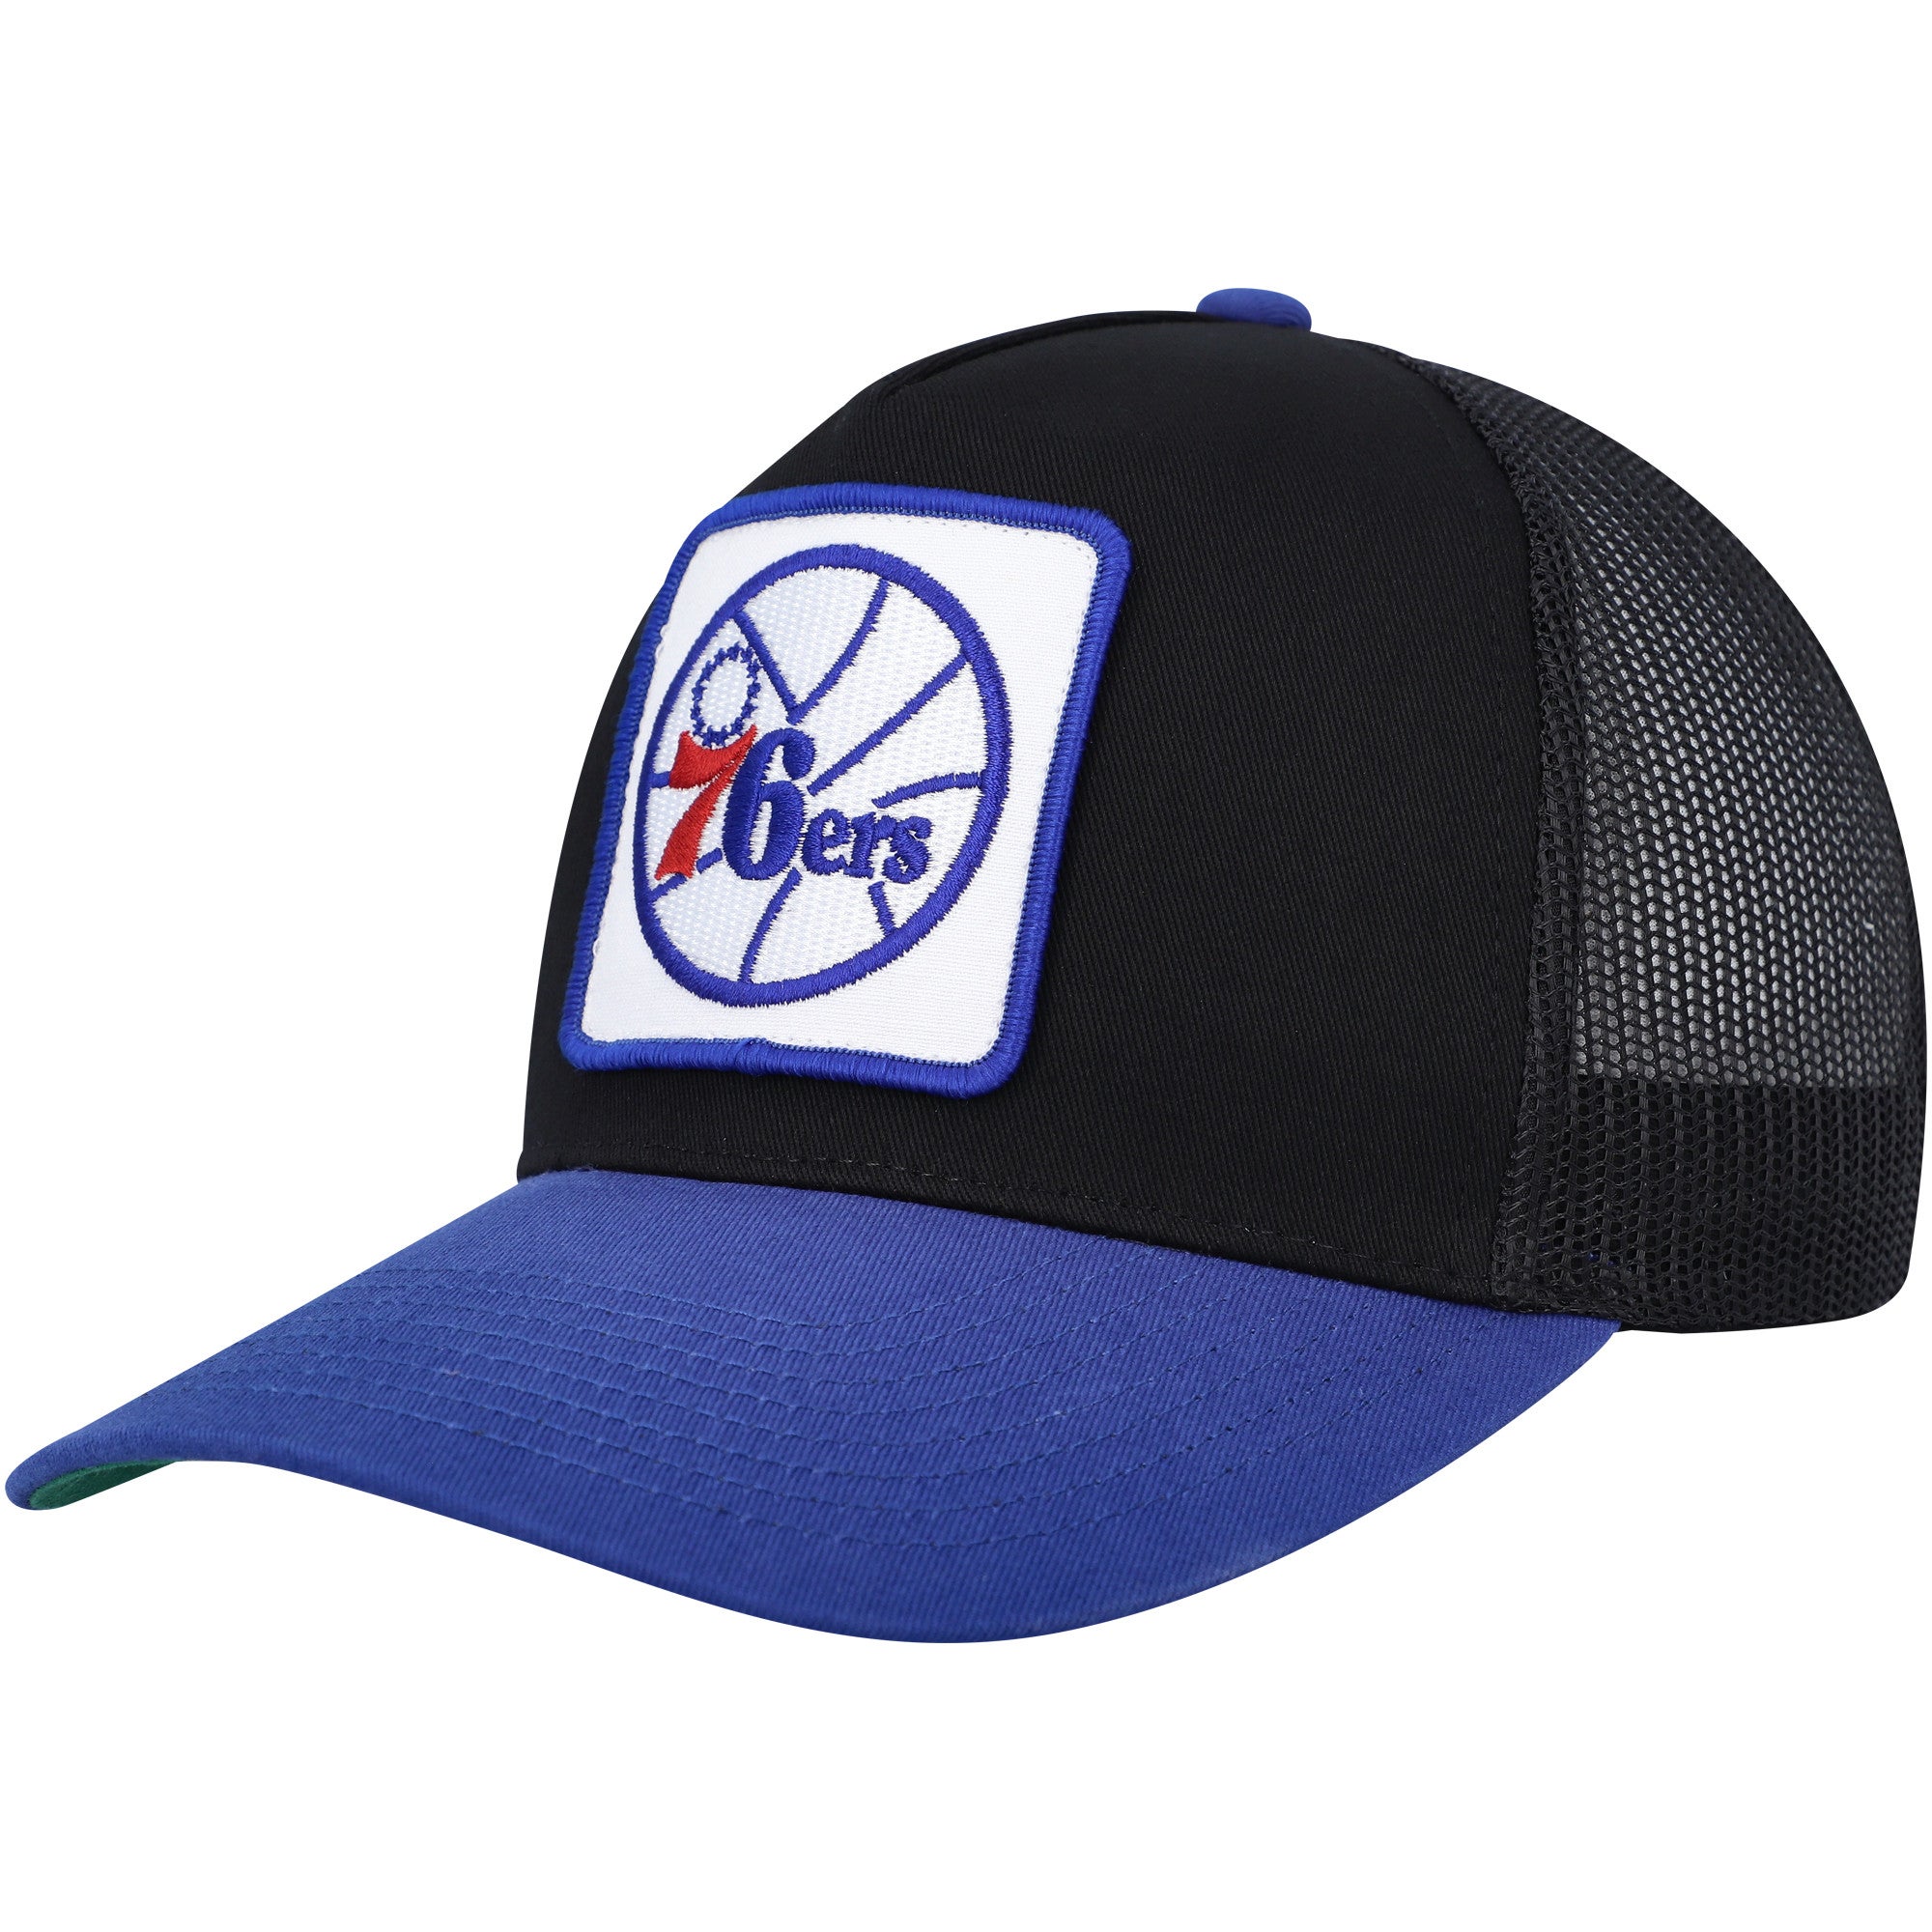 76ers mitchell and ness hat